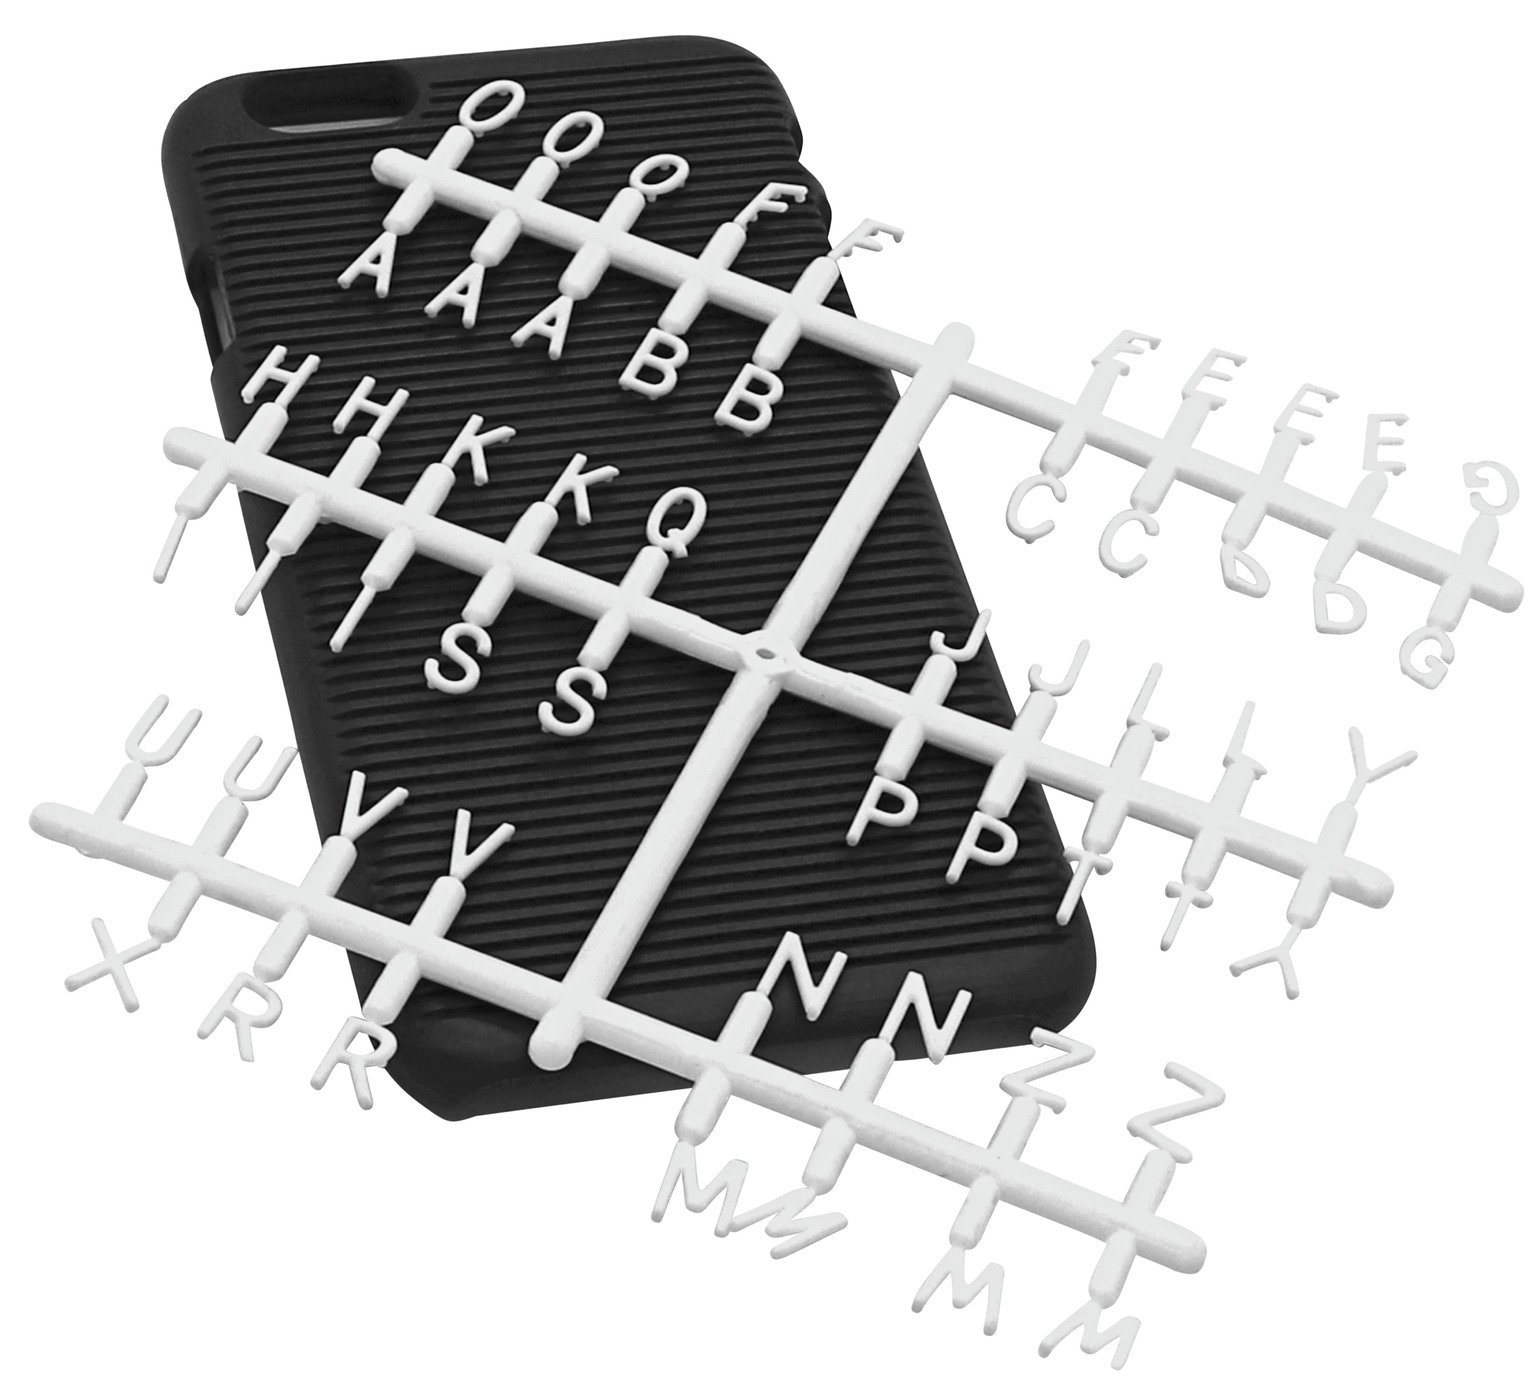 Doin it for the Gram Letter Board Phone Case Assortment Review